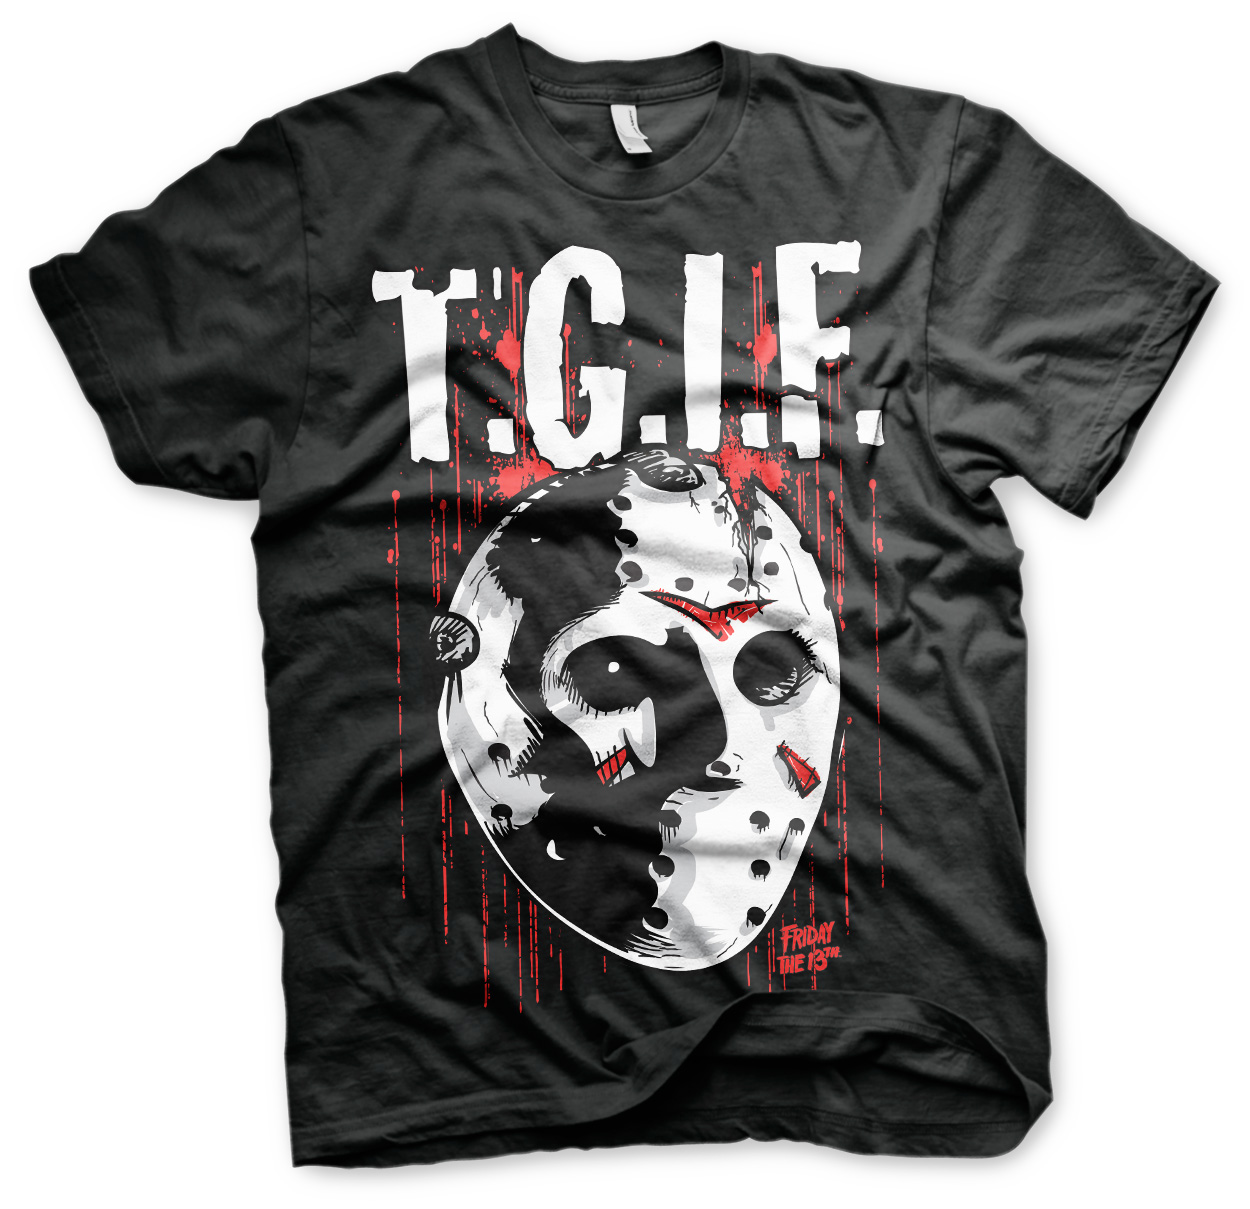 Friday The 13th - T.G.I.F. T-Shirt